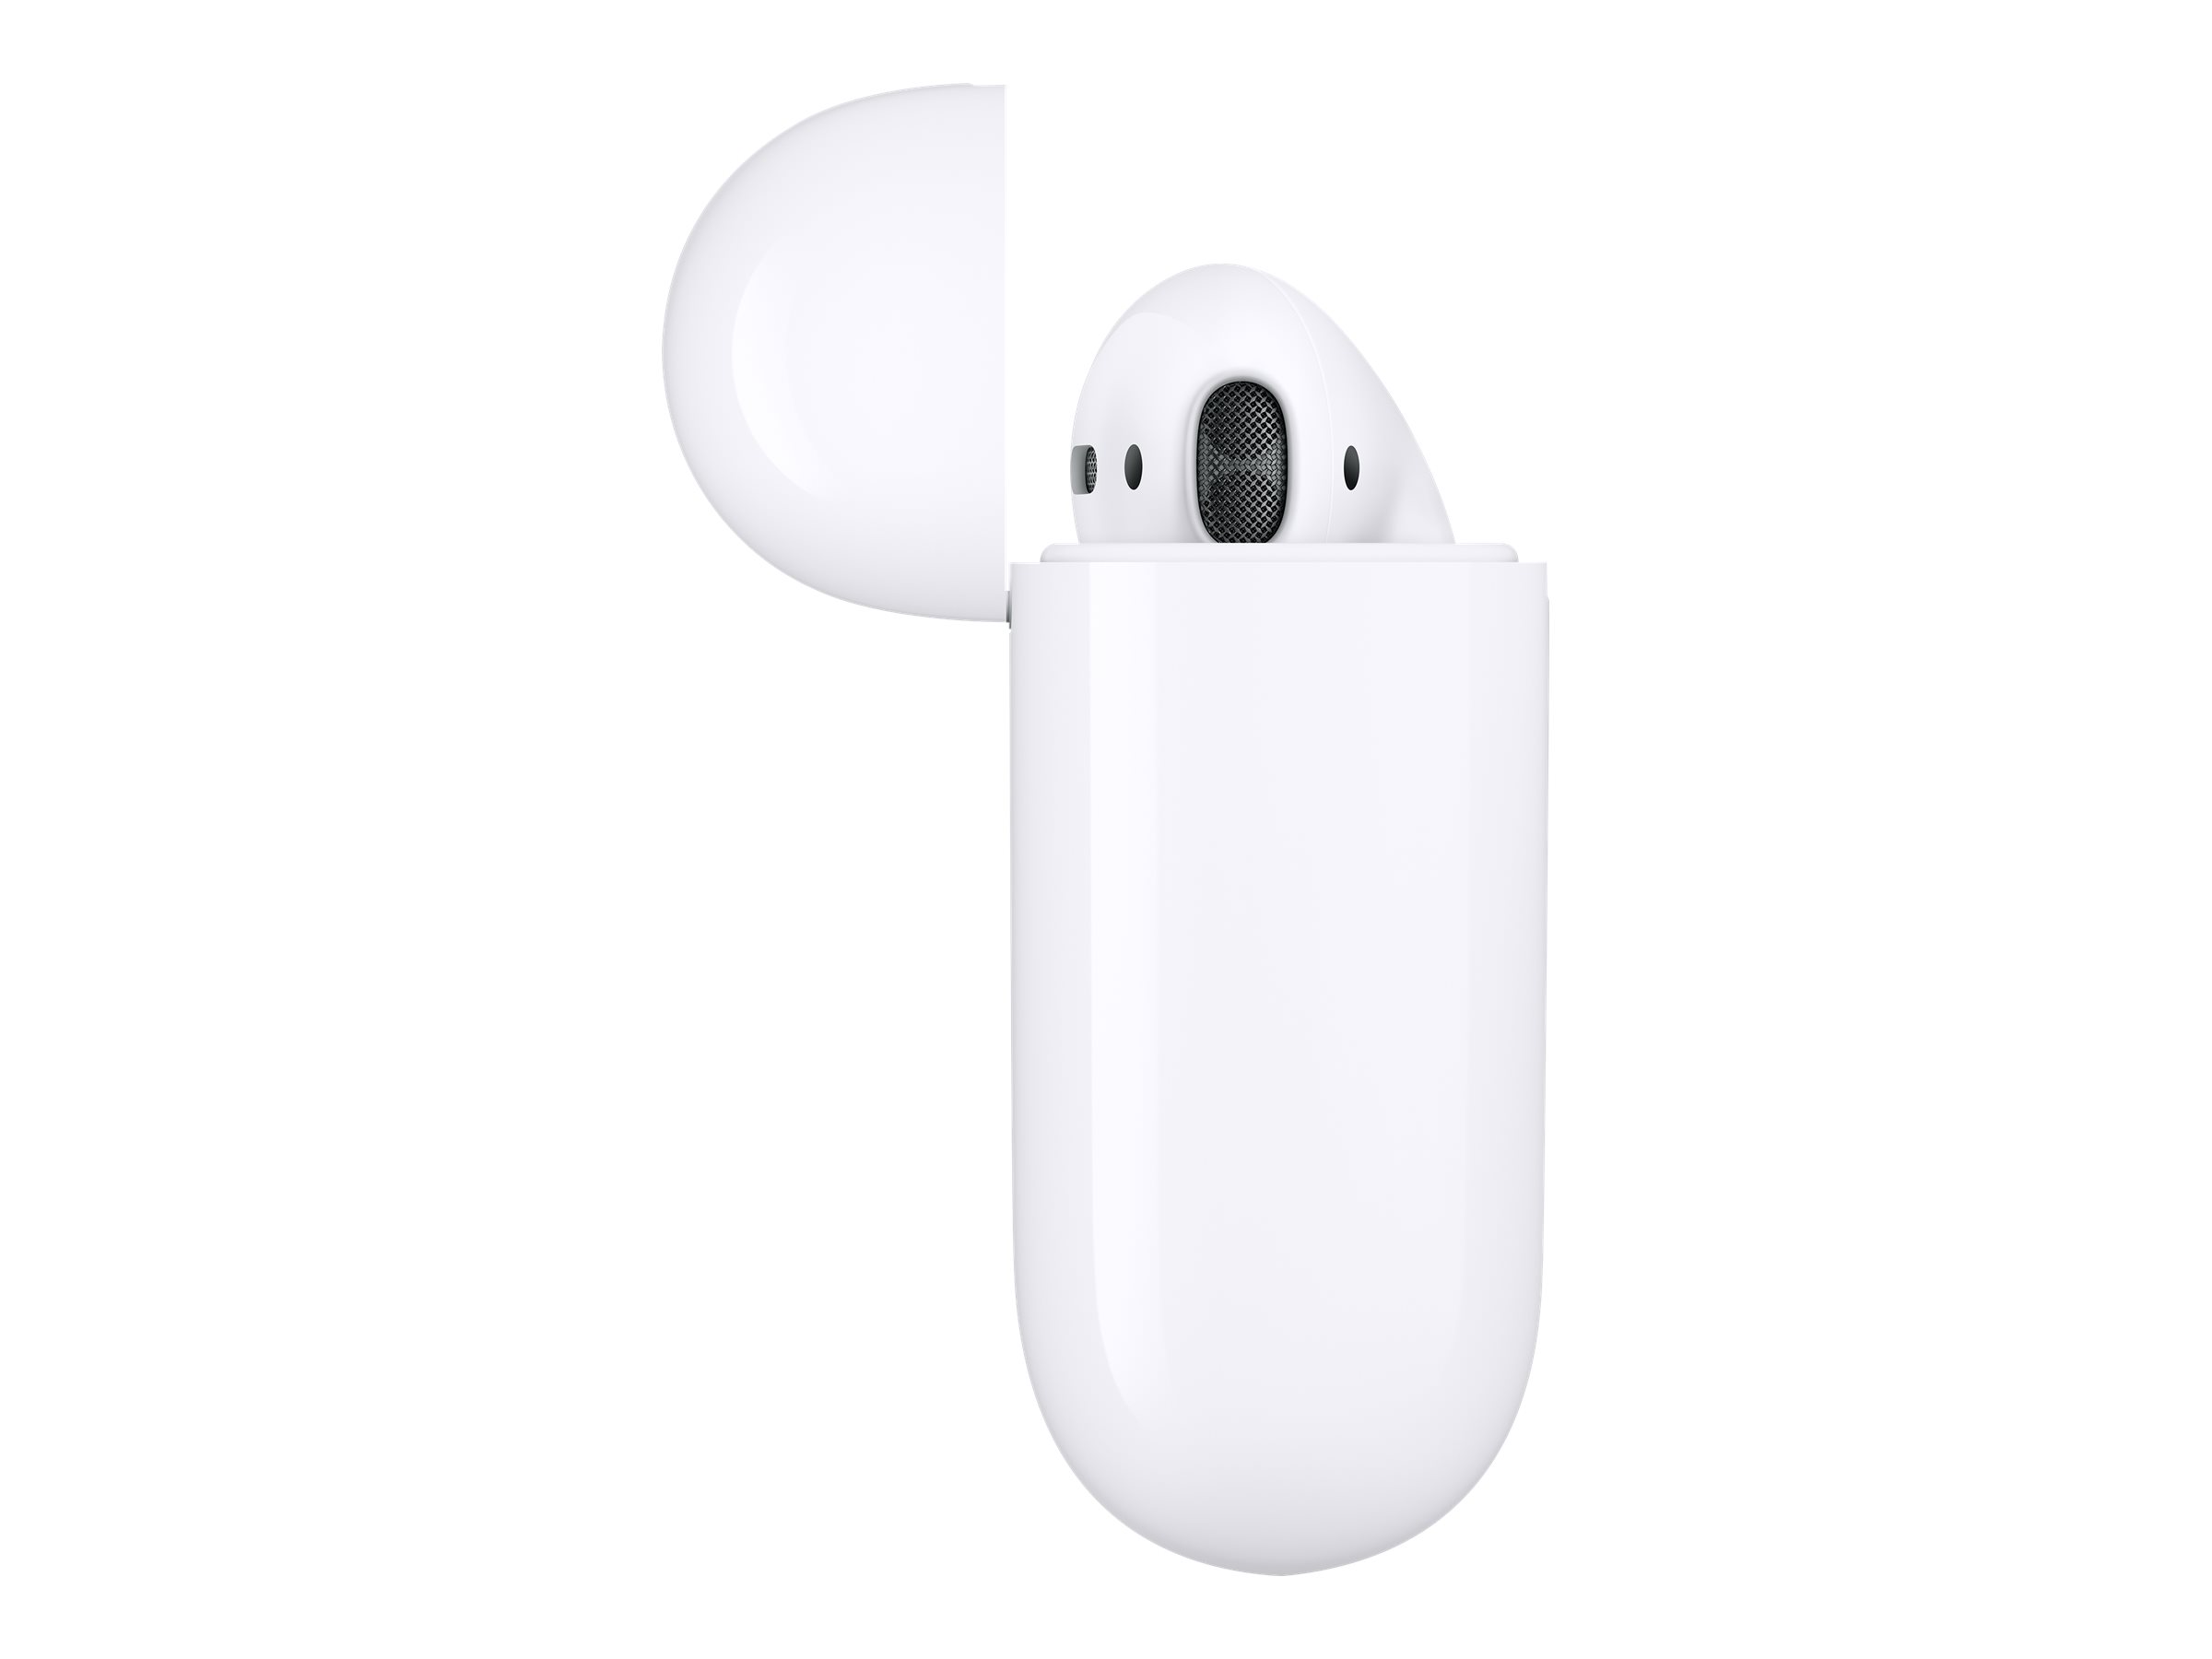 Apple AirPods - 1st Generation